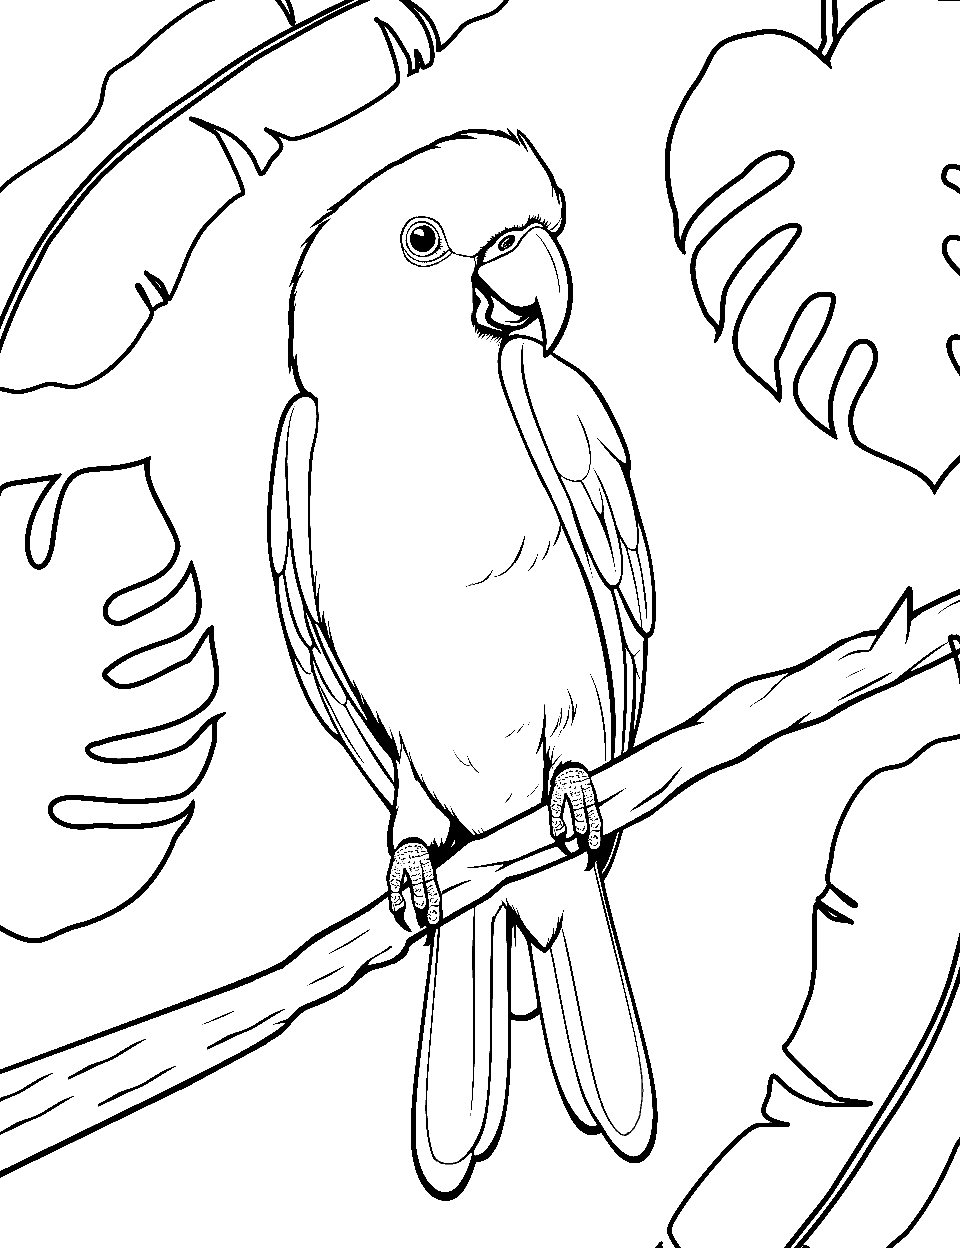 Macaw's Tropical Haven Coloring Page - A macaw enjoying the ambiance of a tropical forest.